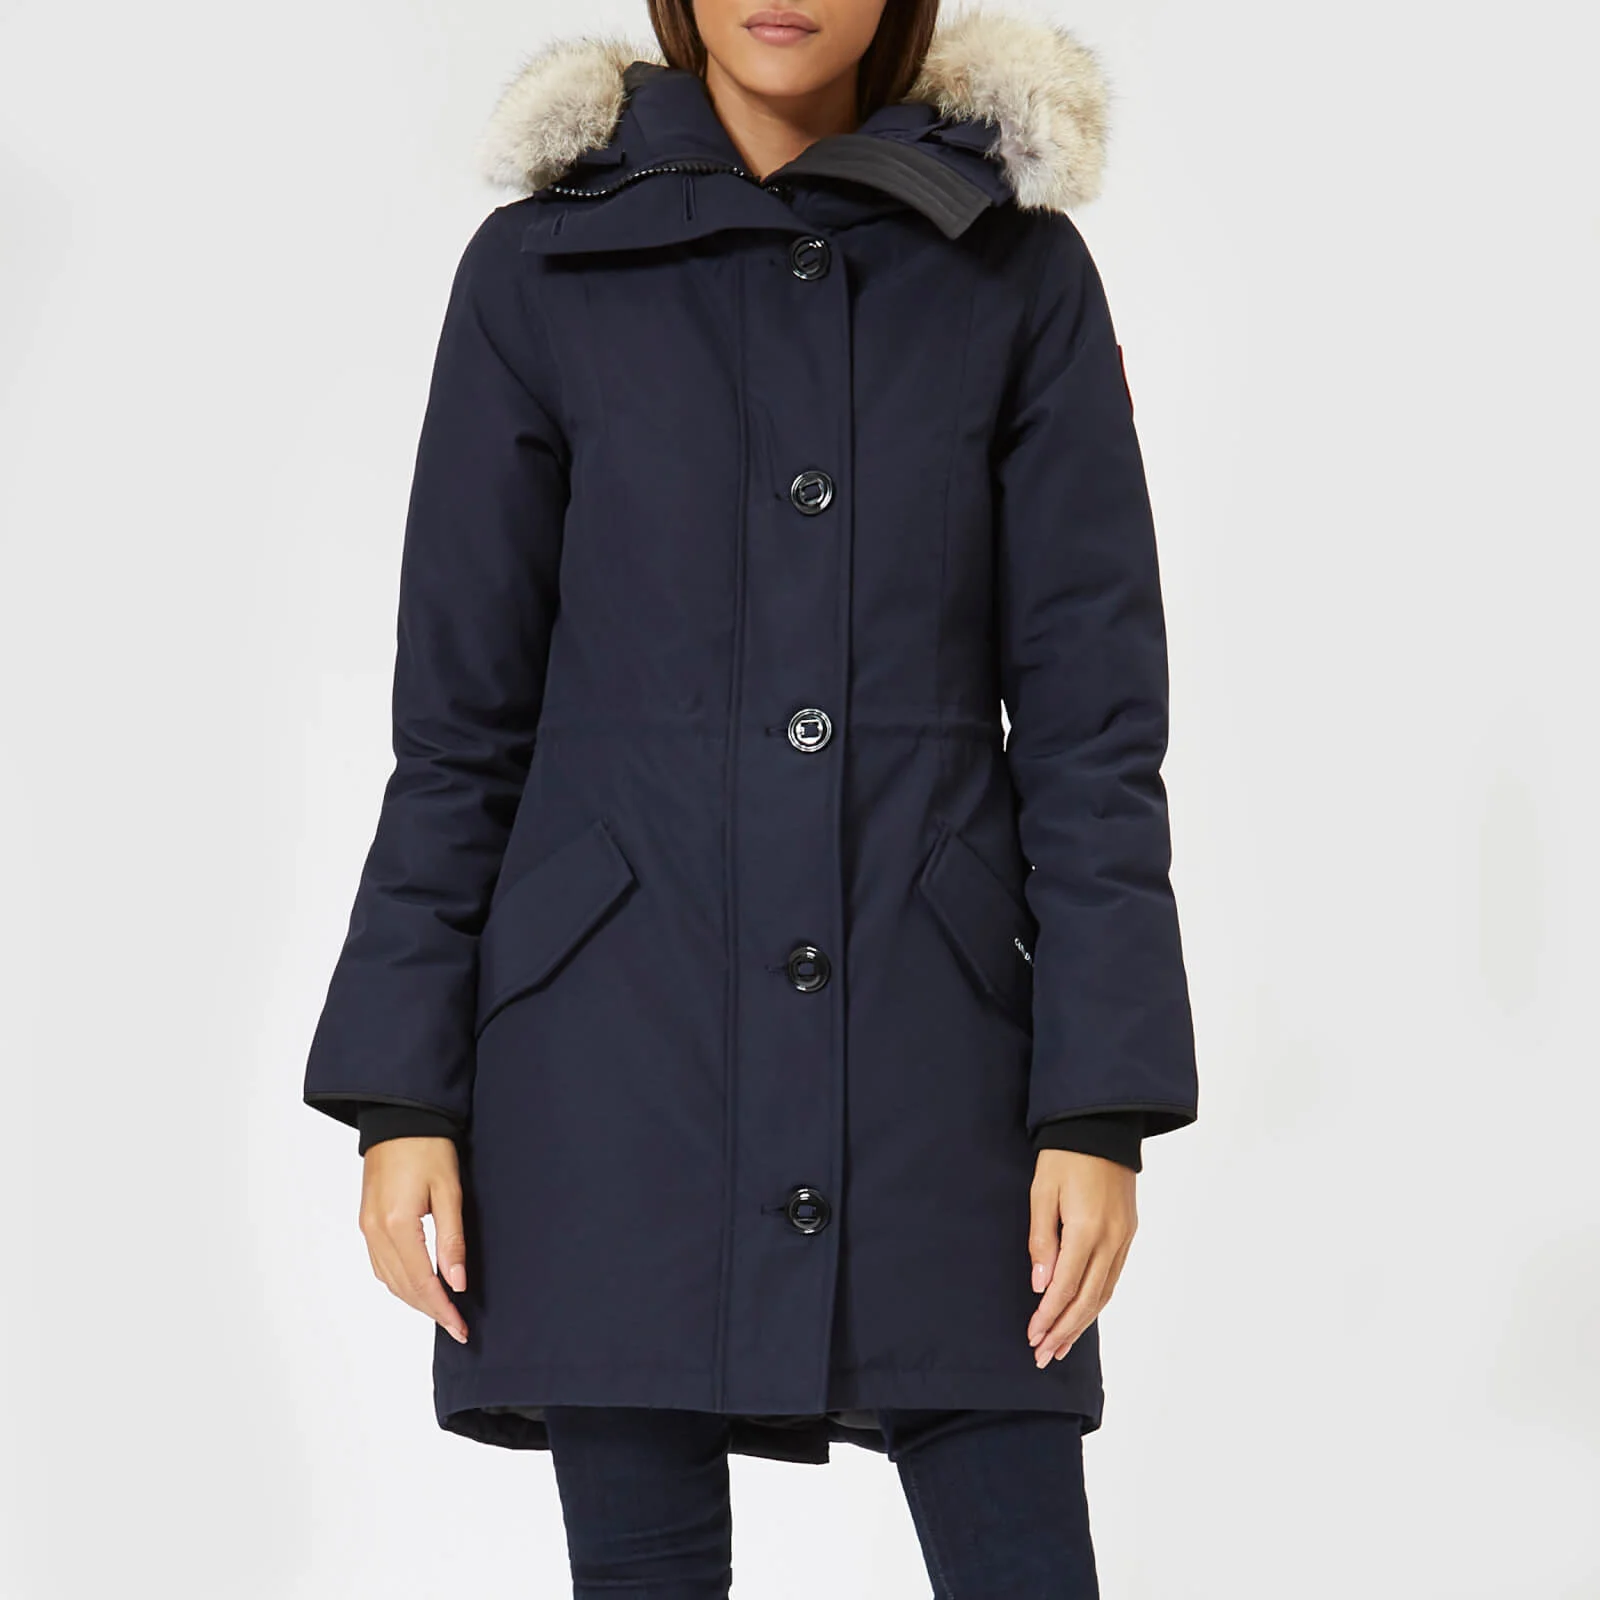 Canada Goose Women's Rossclair Parka - Admiral Blue Image 1